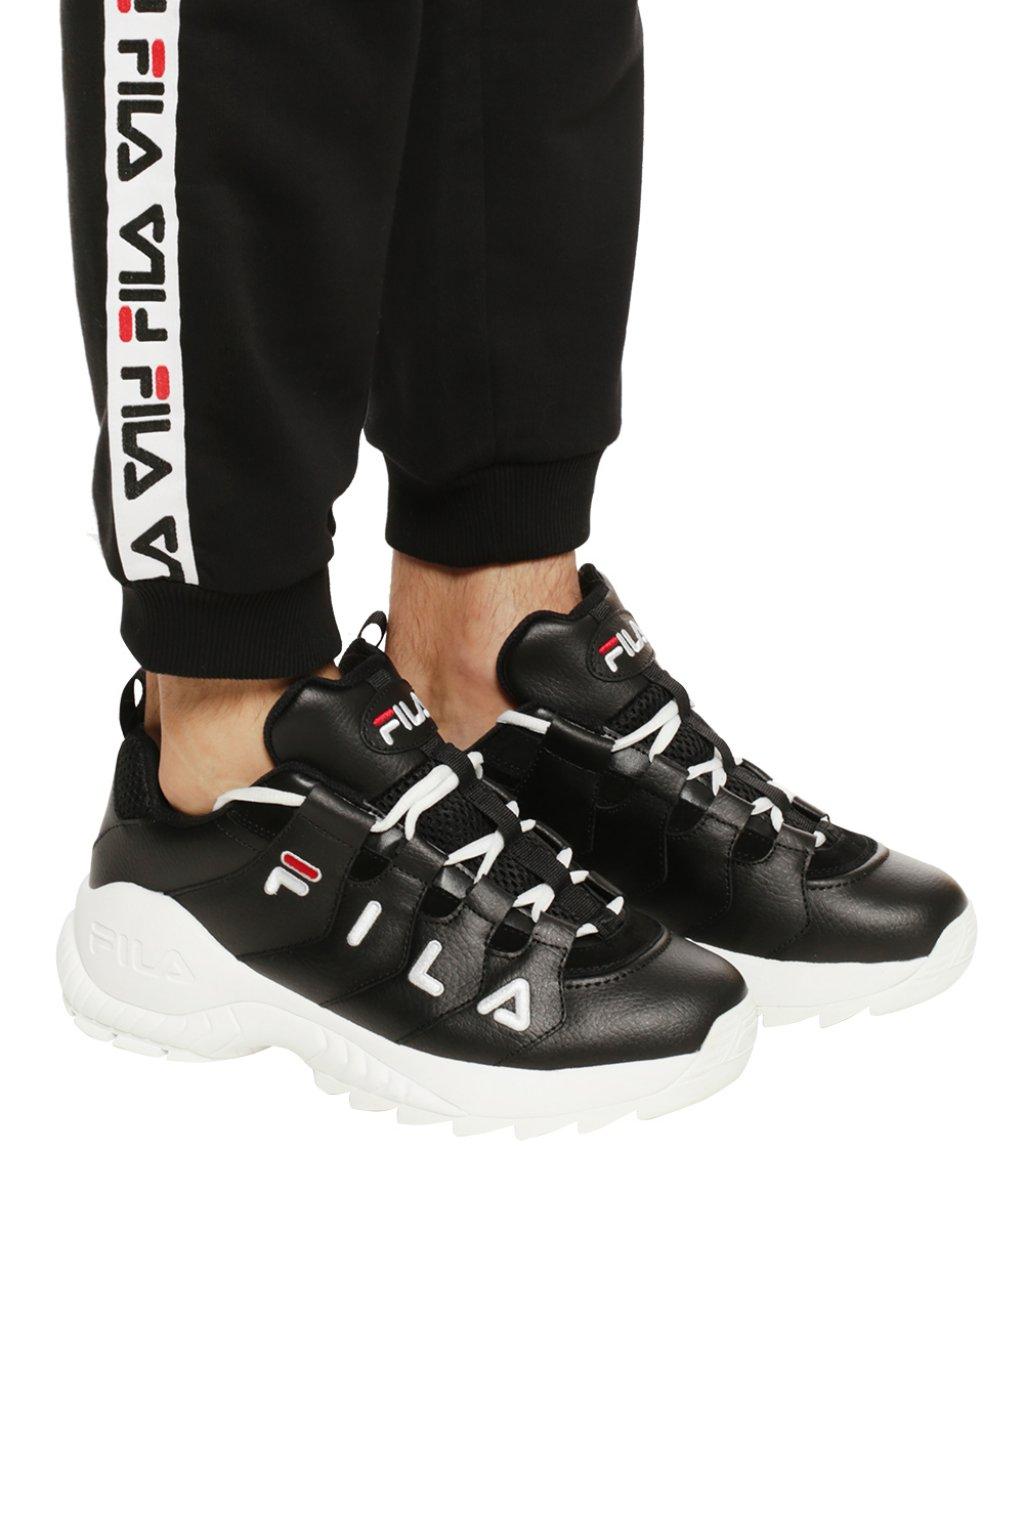 Buy,fila black leather sneakers,Exclusive Deals and Offers,admin.gahar ...